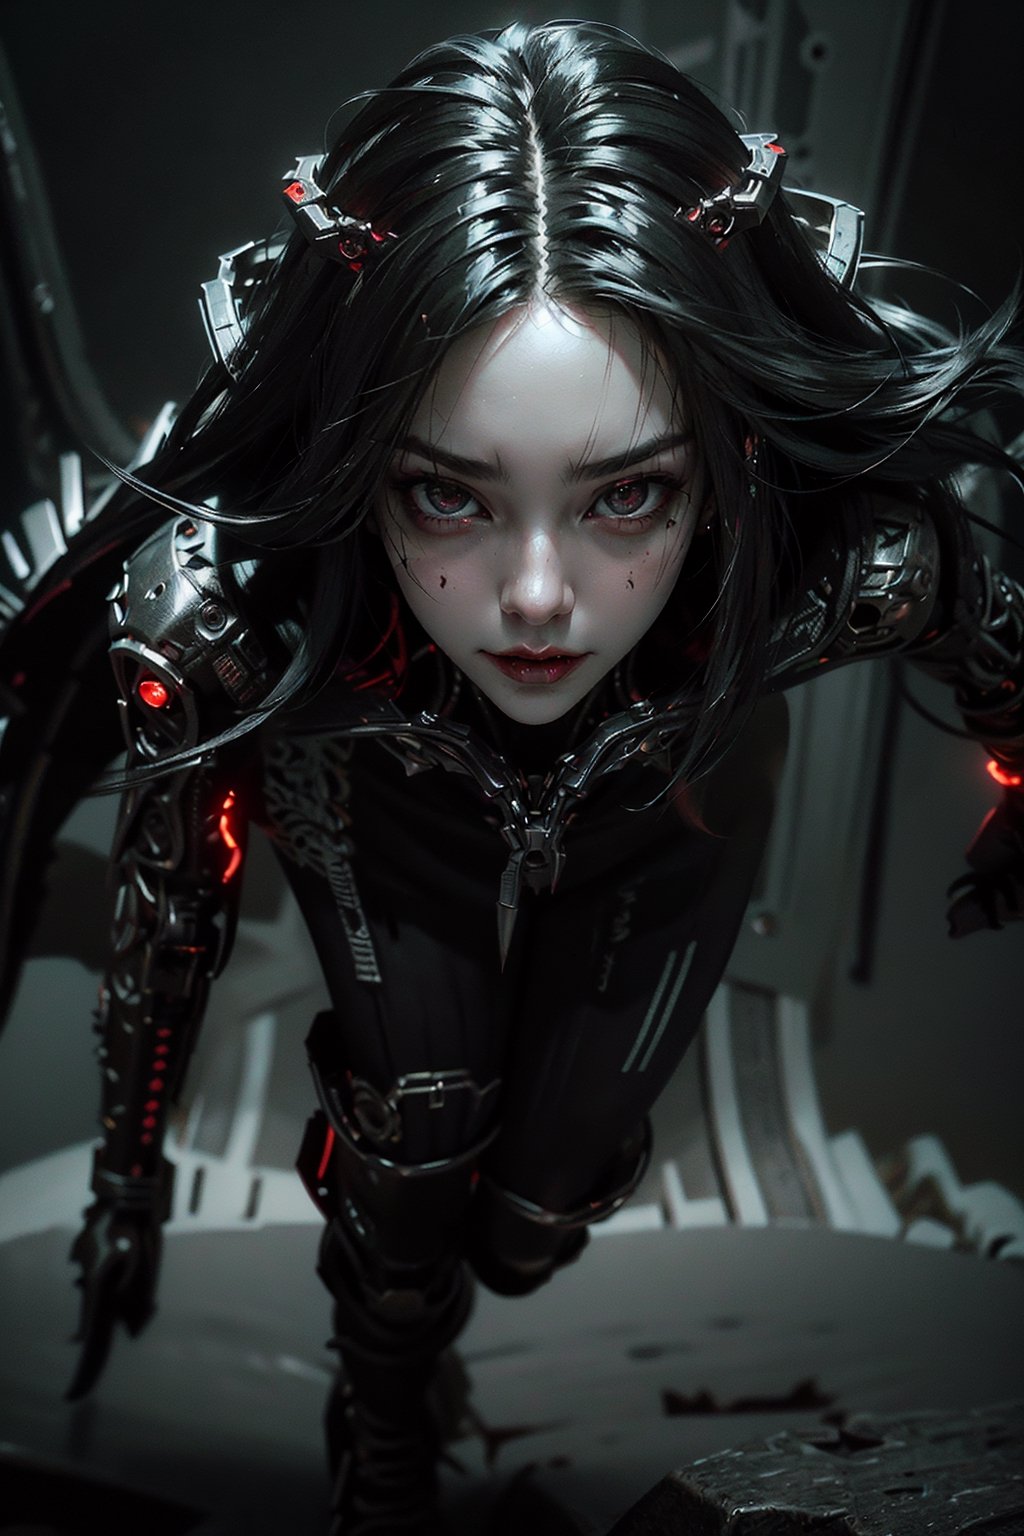 A female vampire, futuristic vampire, beautiful face, realistic face, detailed face, sinister smile, vampiric fangs, cyberpunk gear, (((long flowing hair))), neon-lit cityscape, cold piercing eyes, vamptech-enhanced attire, glowing veins, cybernetic enhancements, high tech urban environement backdrop, dynamic pose, otherworldly, technologically enhanced immortal, High-quality illustration, intricate details, a play of light and shadows, ,vamptech, darkest of nights, red moon, full body shot,horror ,Female soldier,Realism,Detailedface